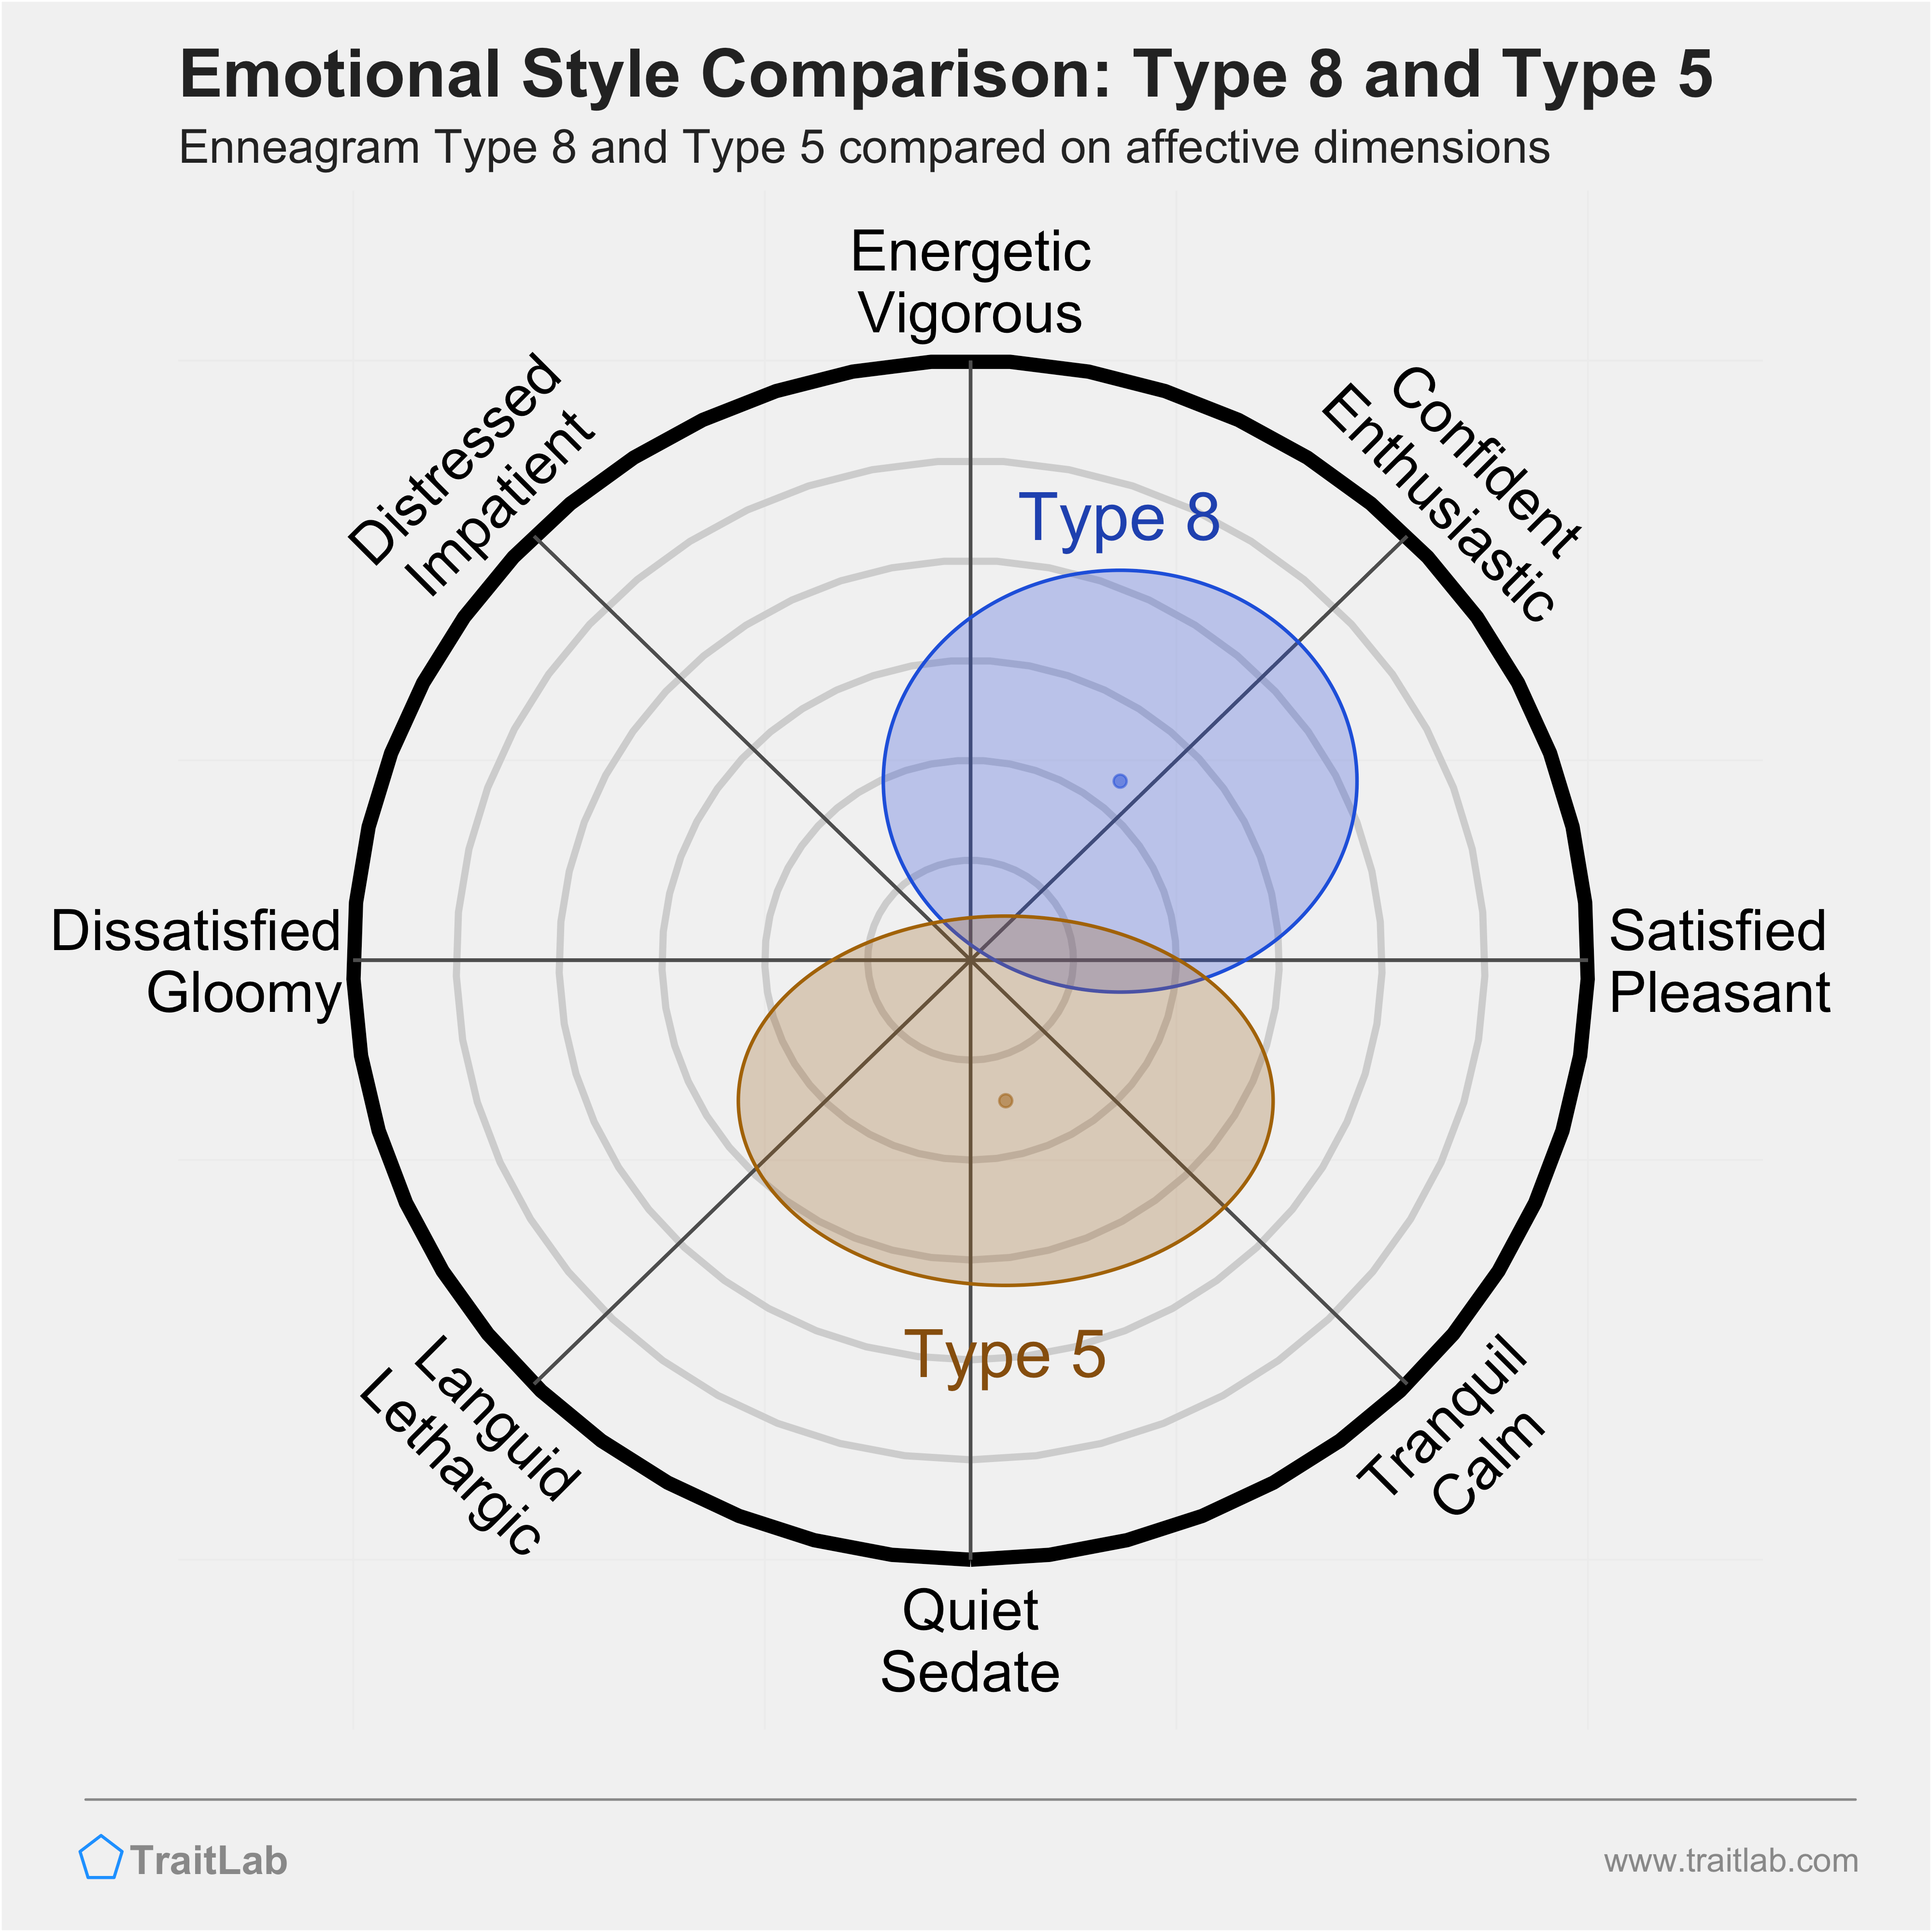 Type 8 and Type 5 comparison across emotional (affective) dimensions